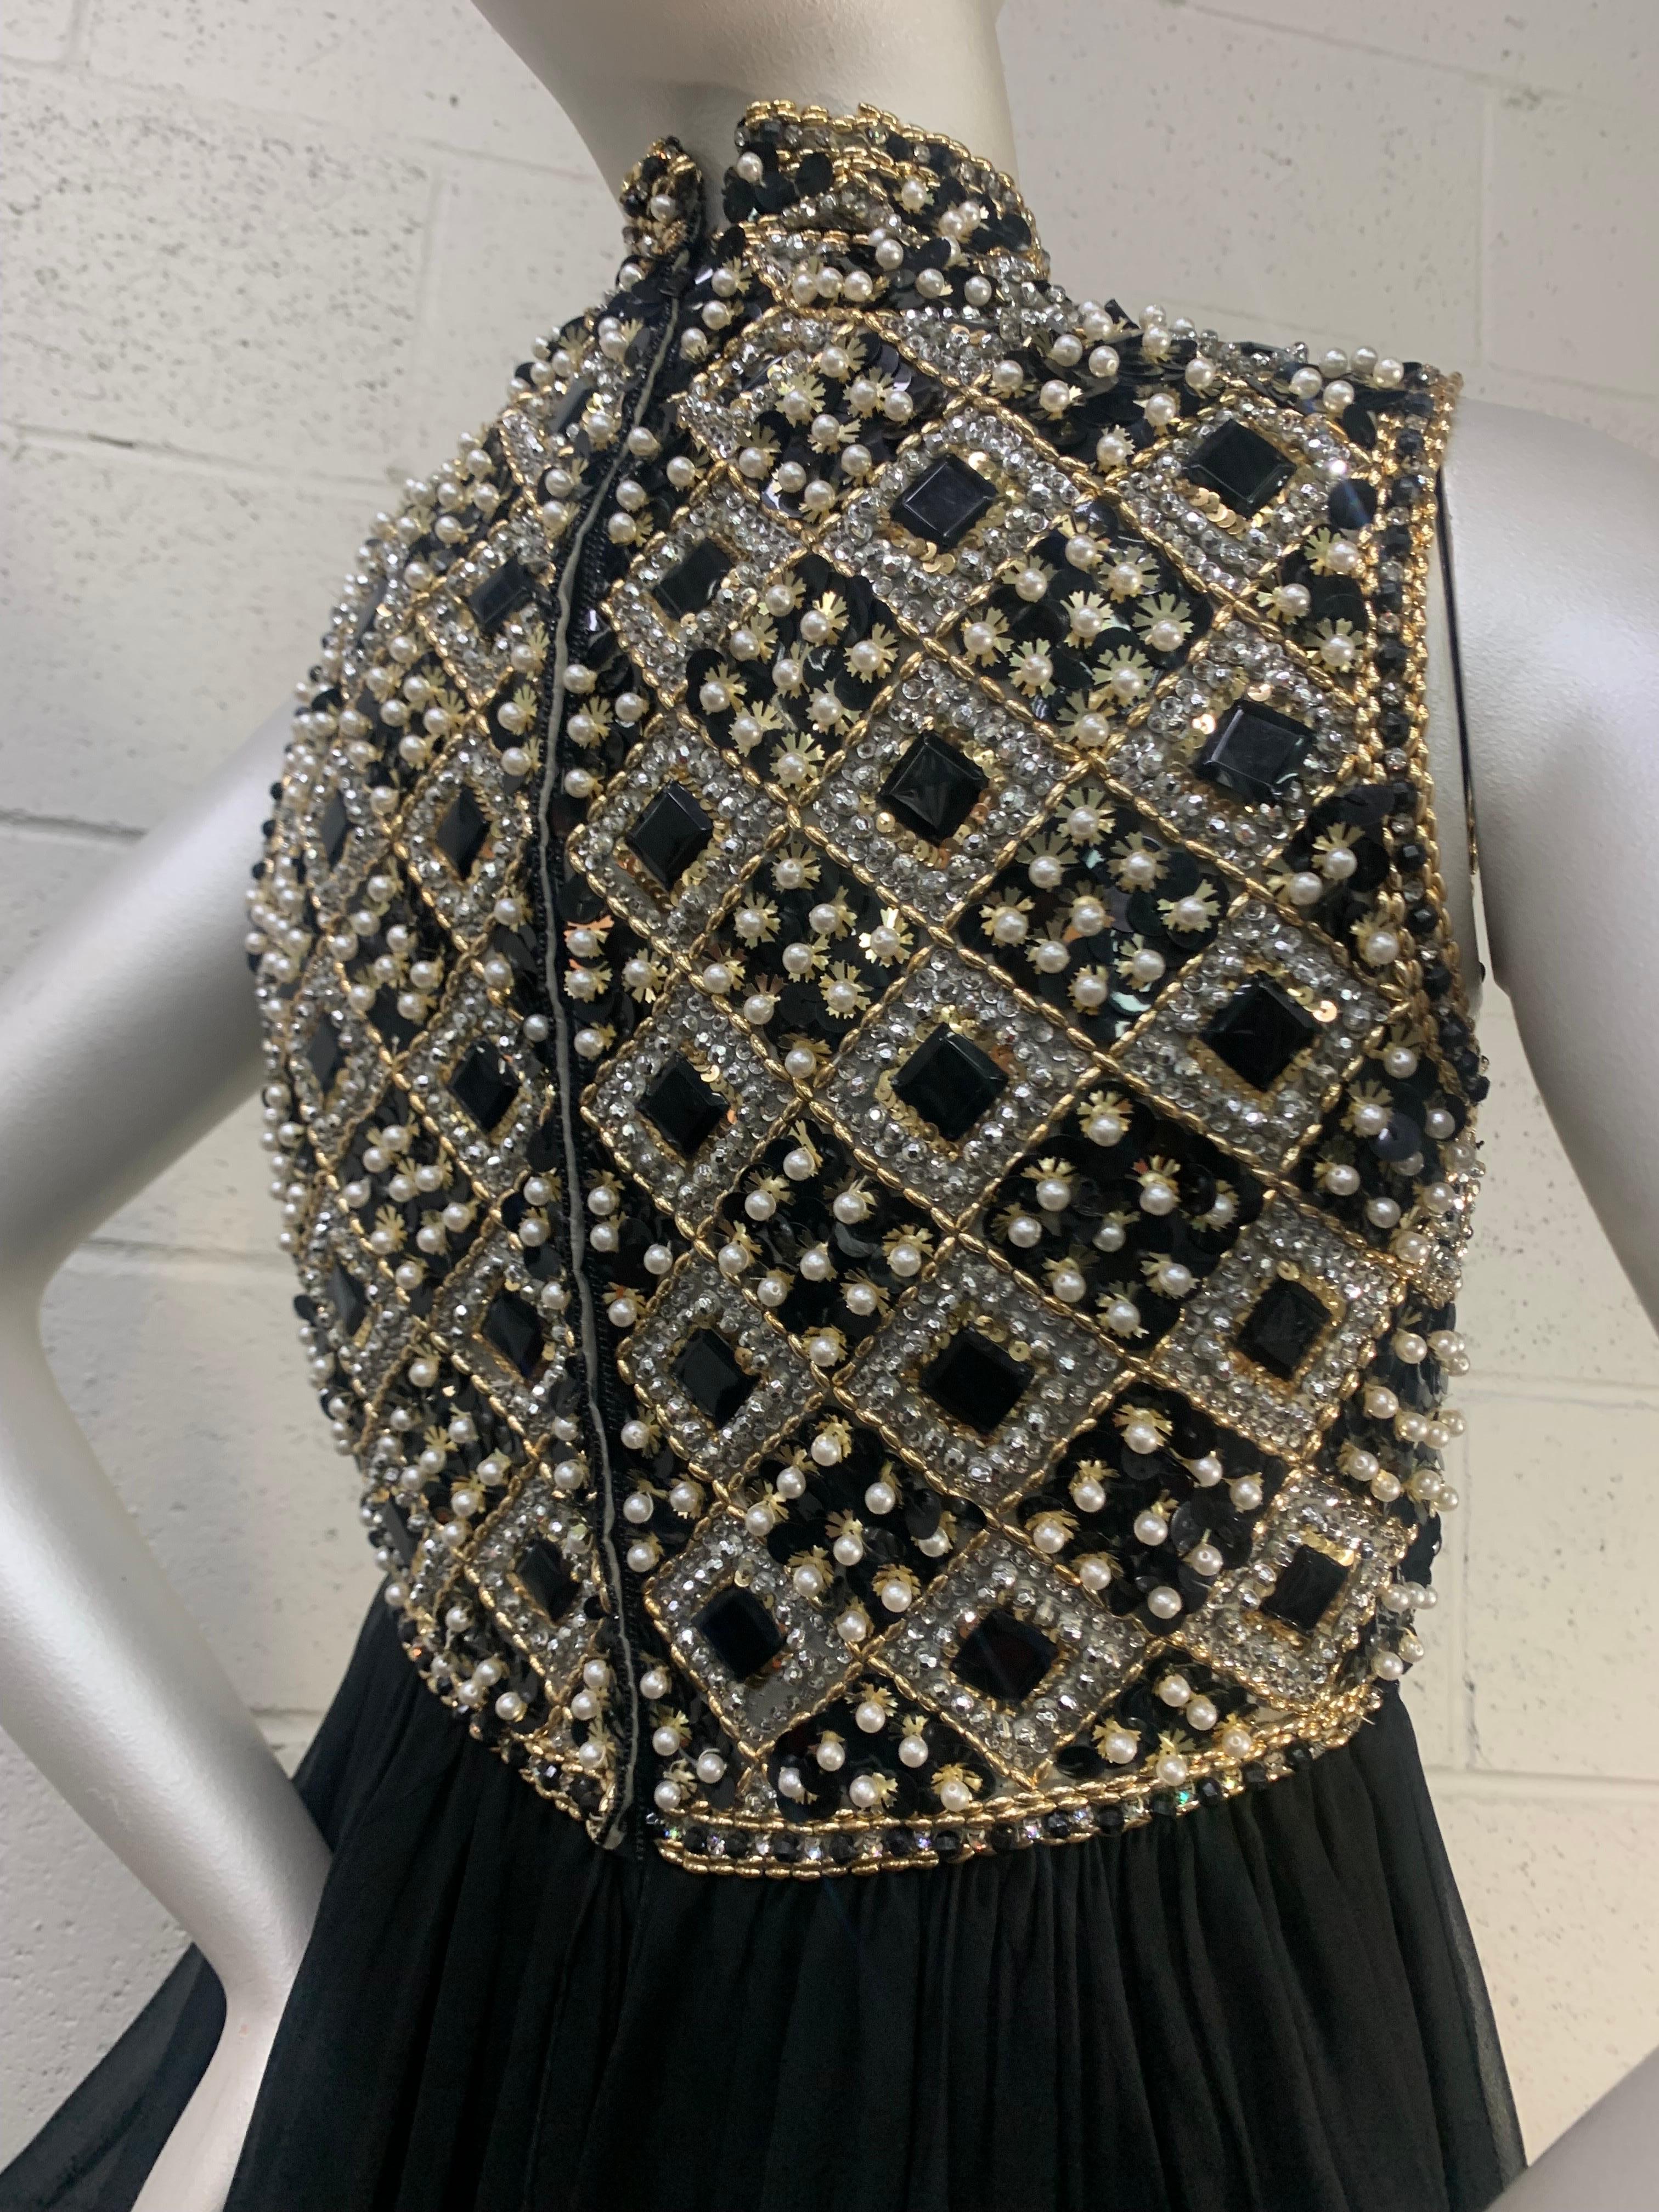 1960s Victoria Royale Ltd. Beaded Sequined Empire Mod Cocktail Dress in Black For Sale 3